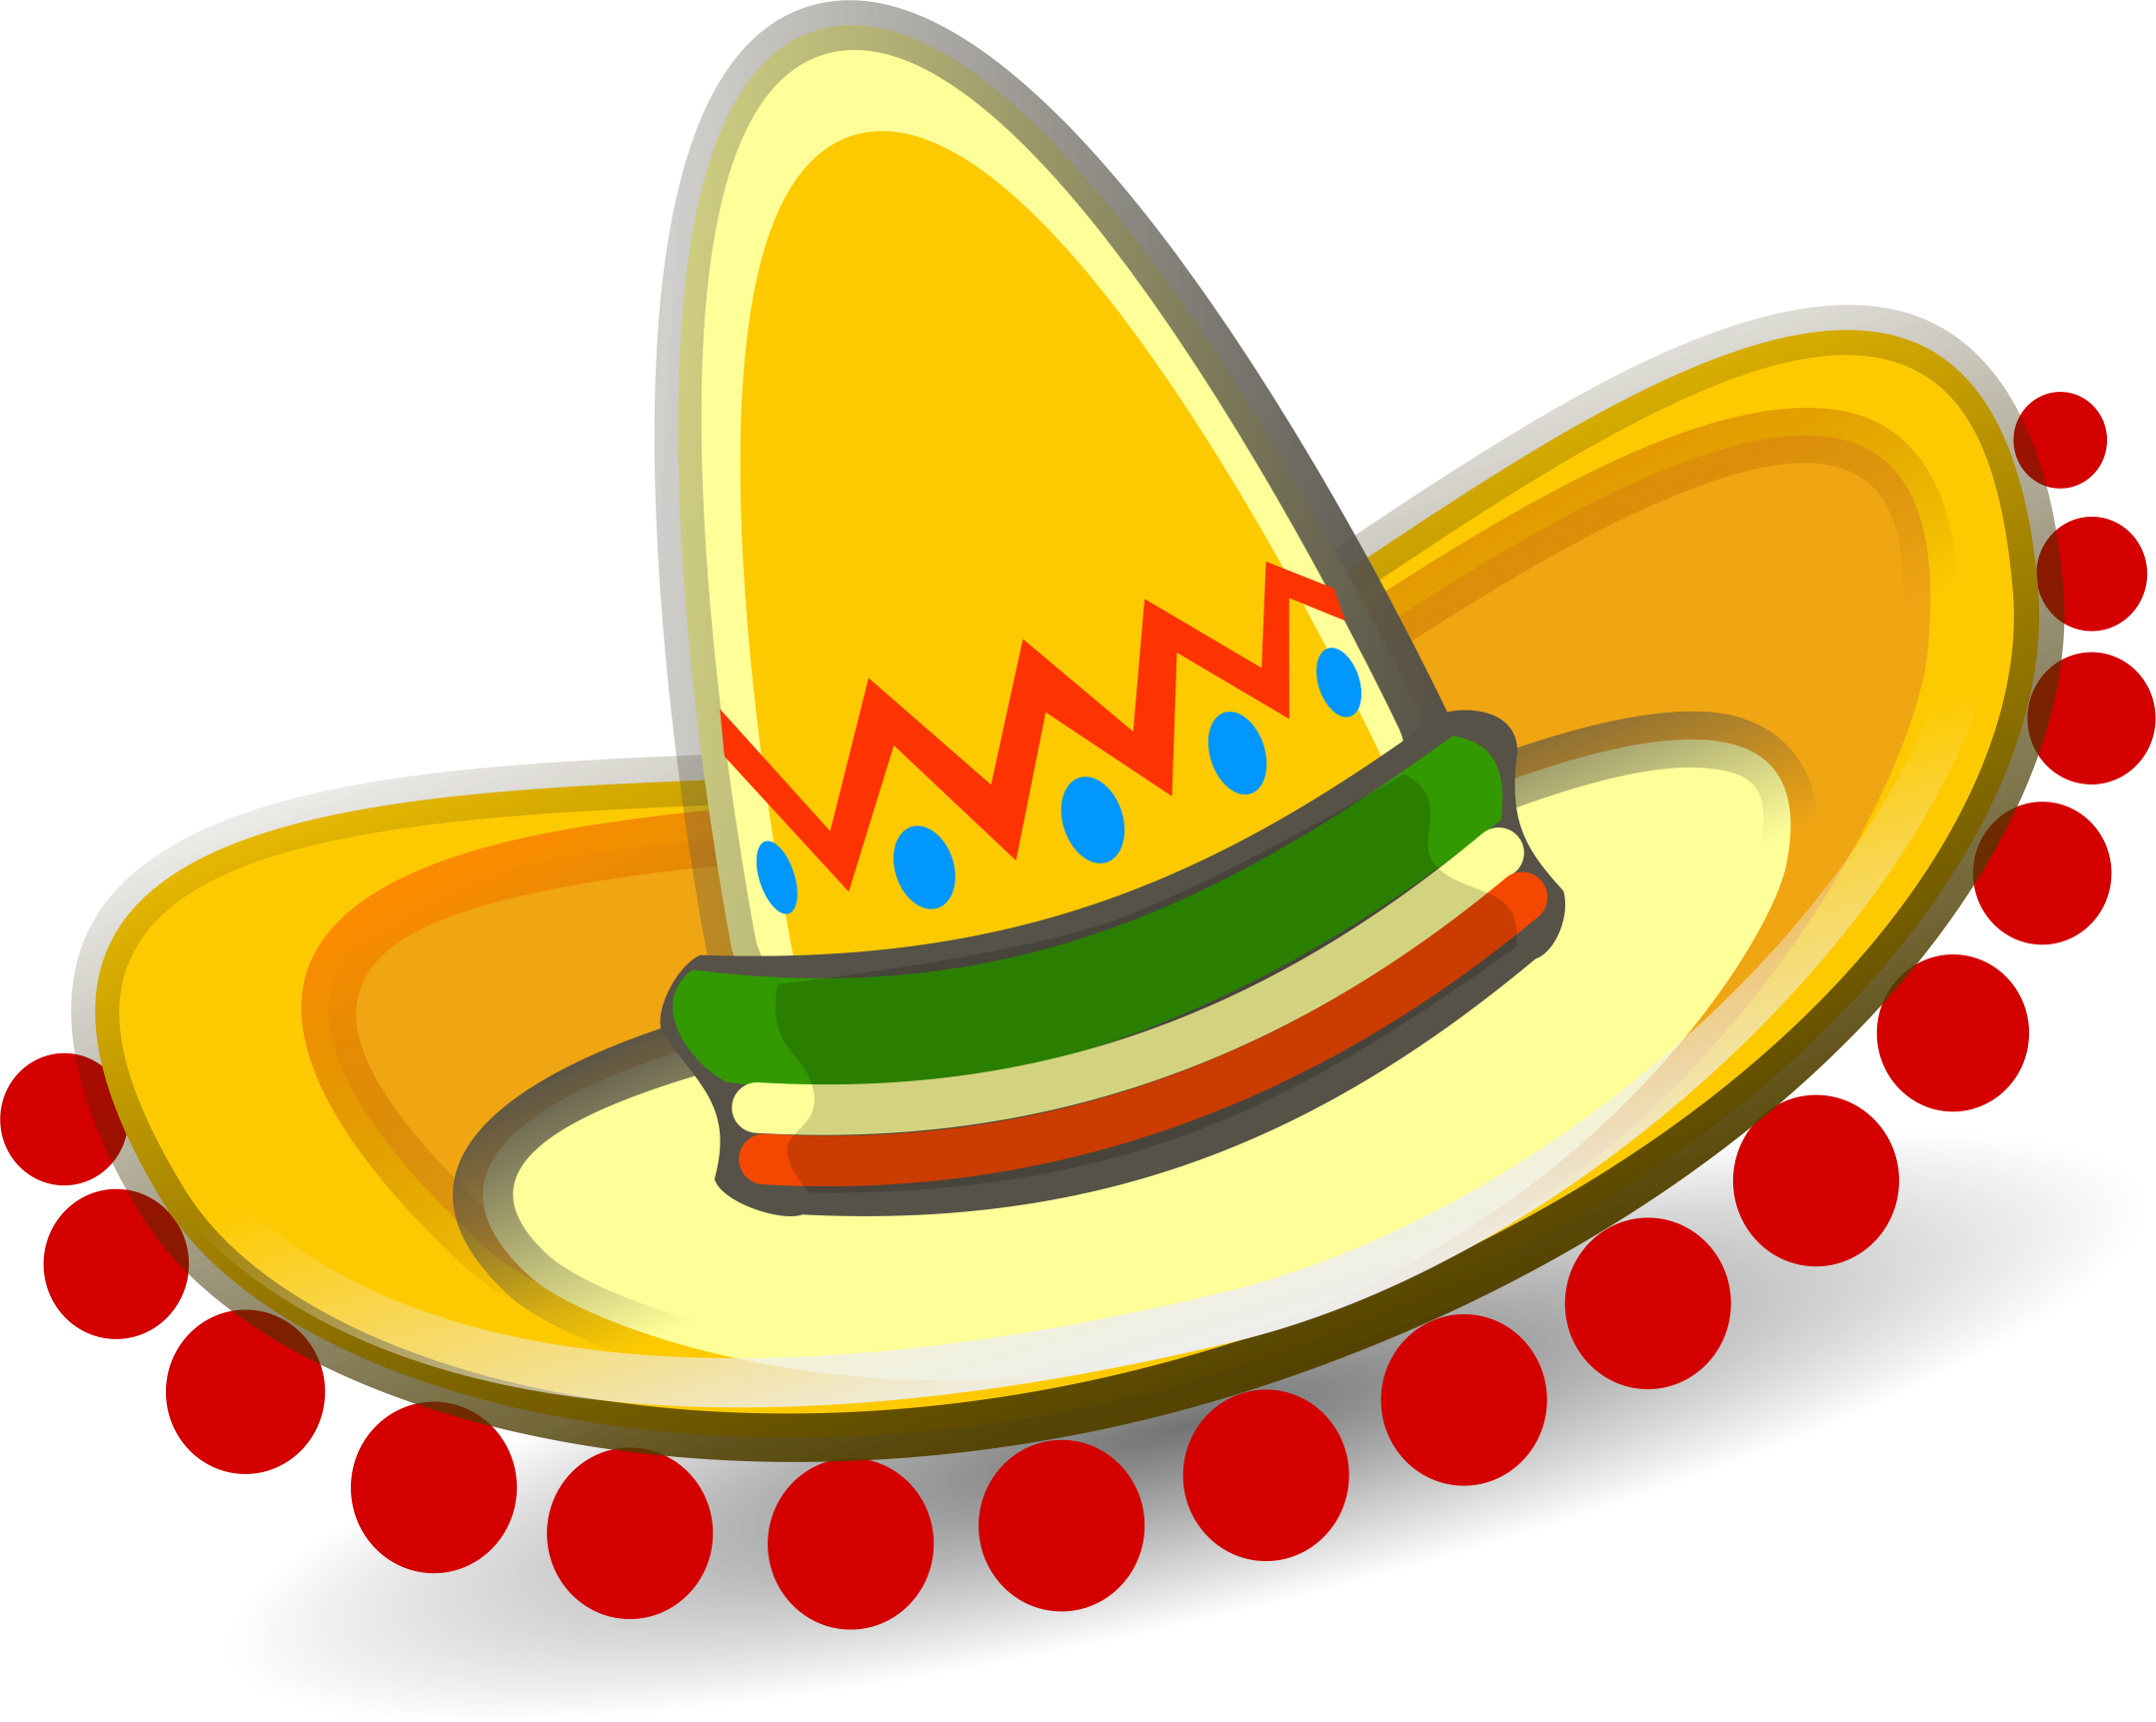 Moustache clipart sombrero. Pin by heather satterfield